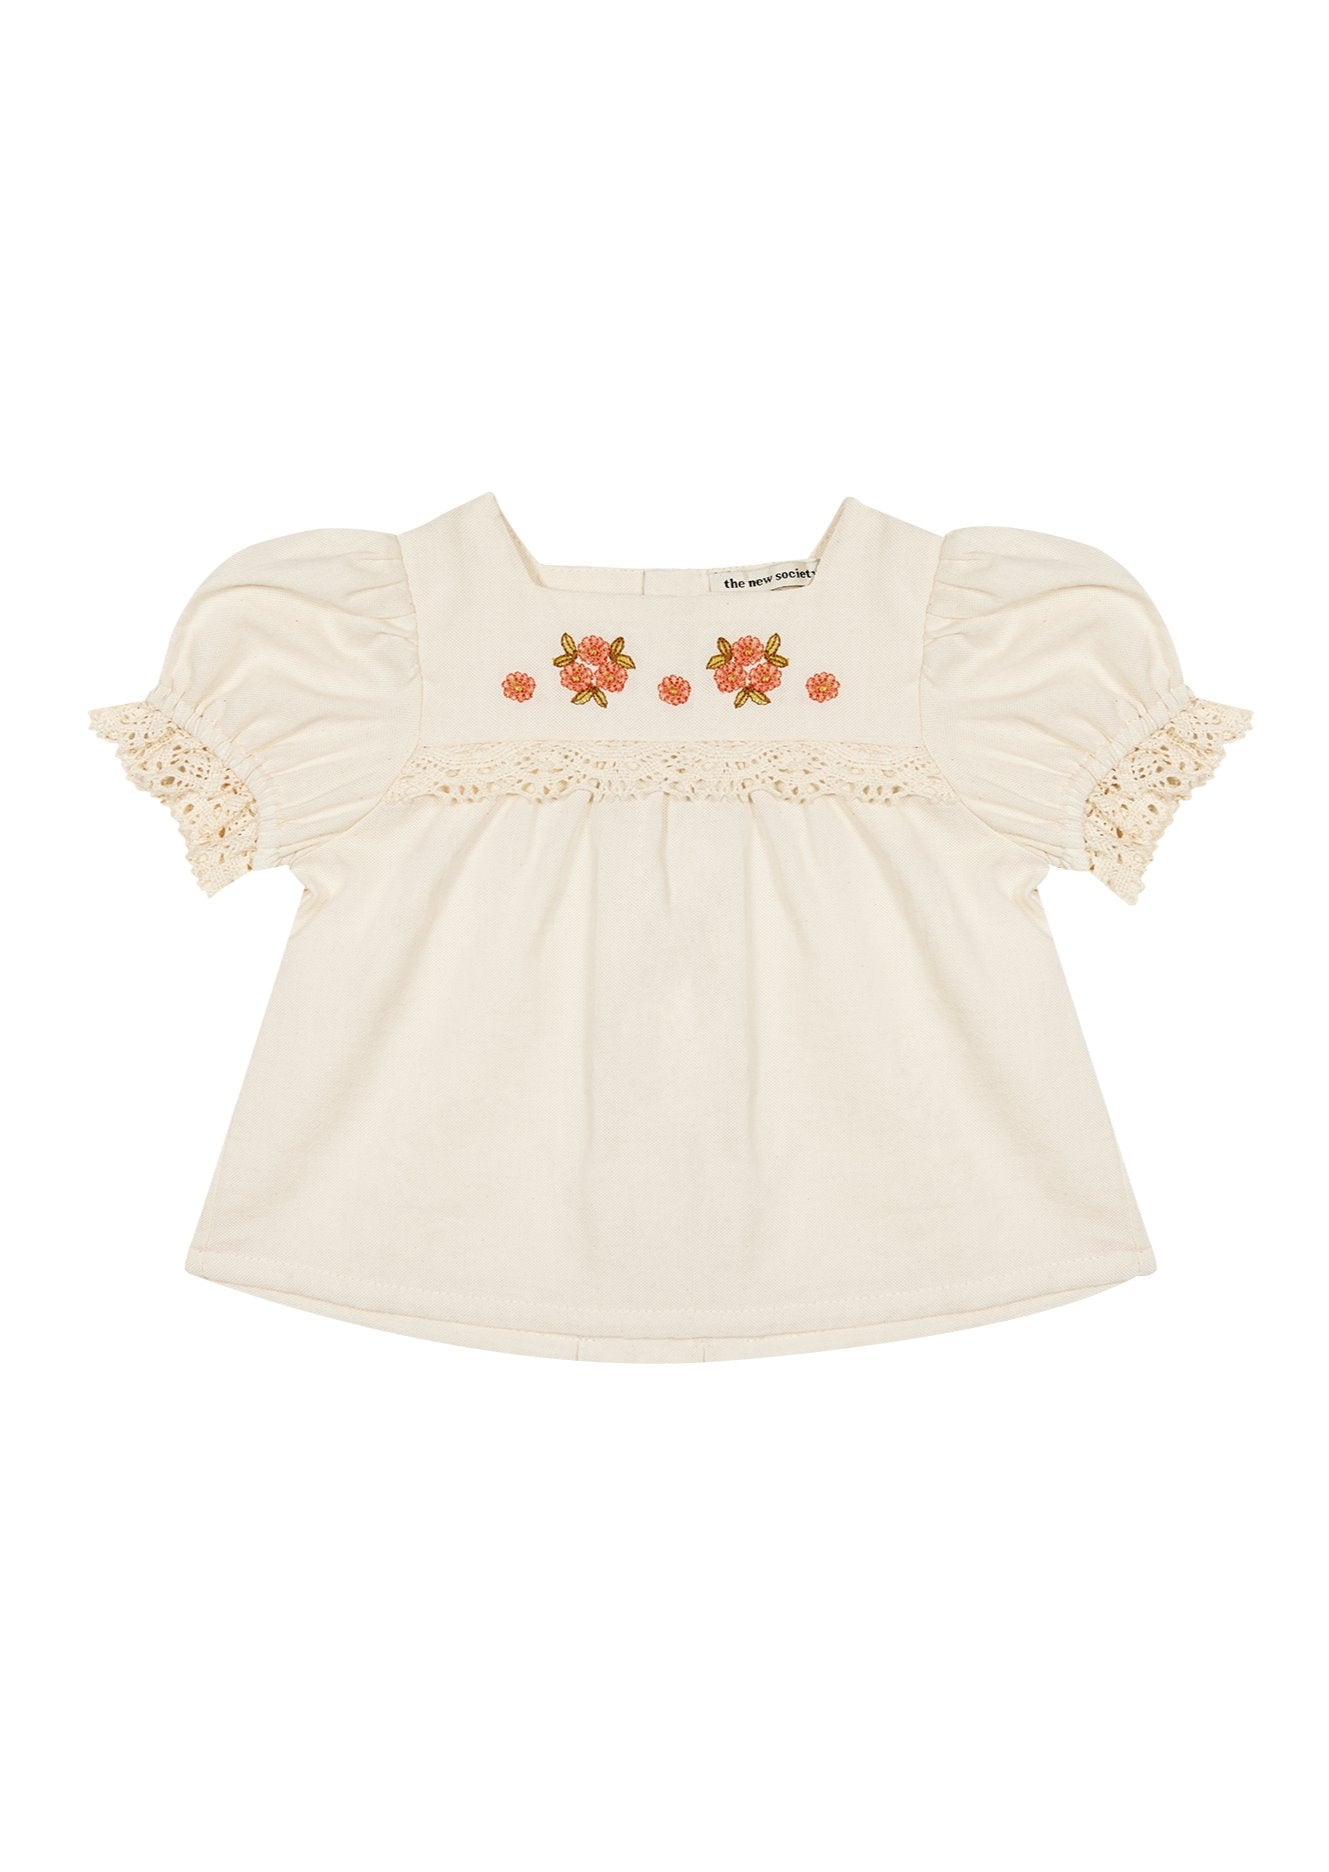 Clementine Baby Blouse Tops The New Society 